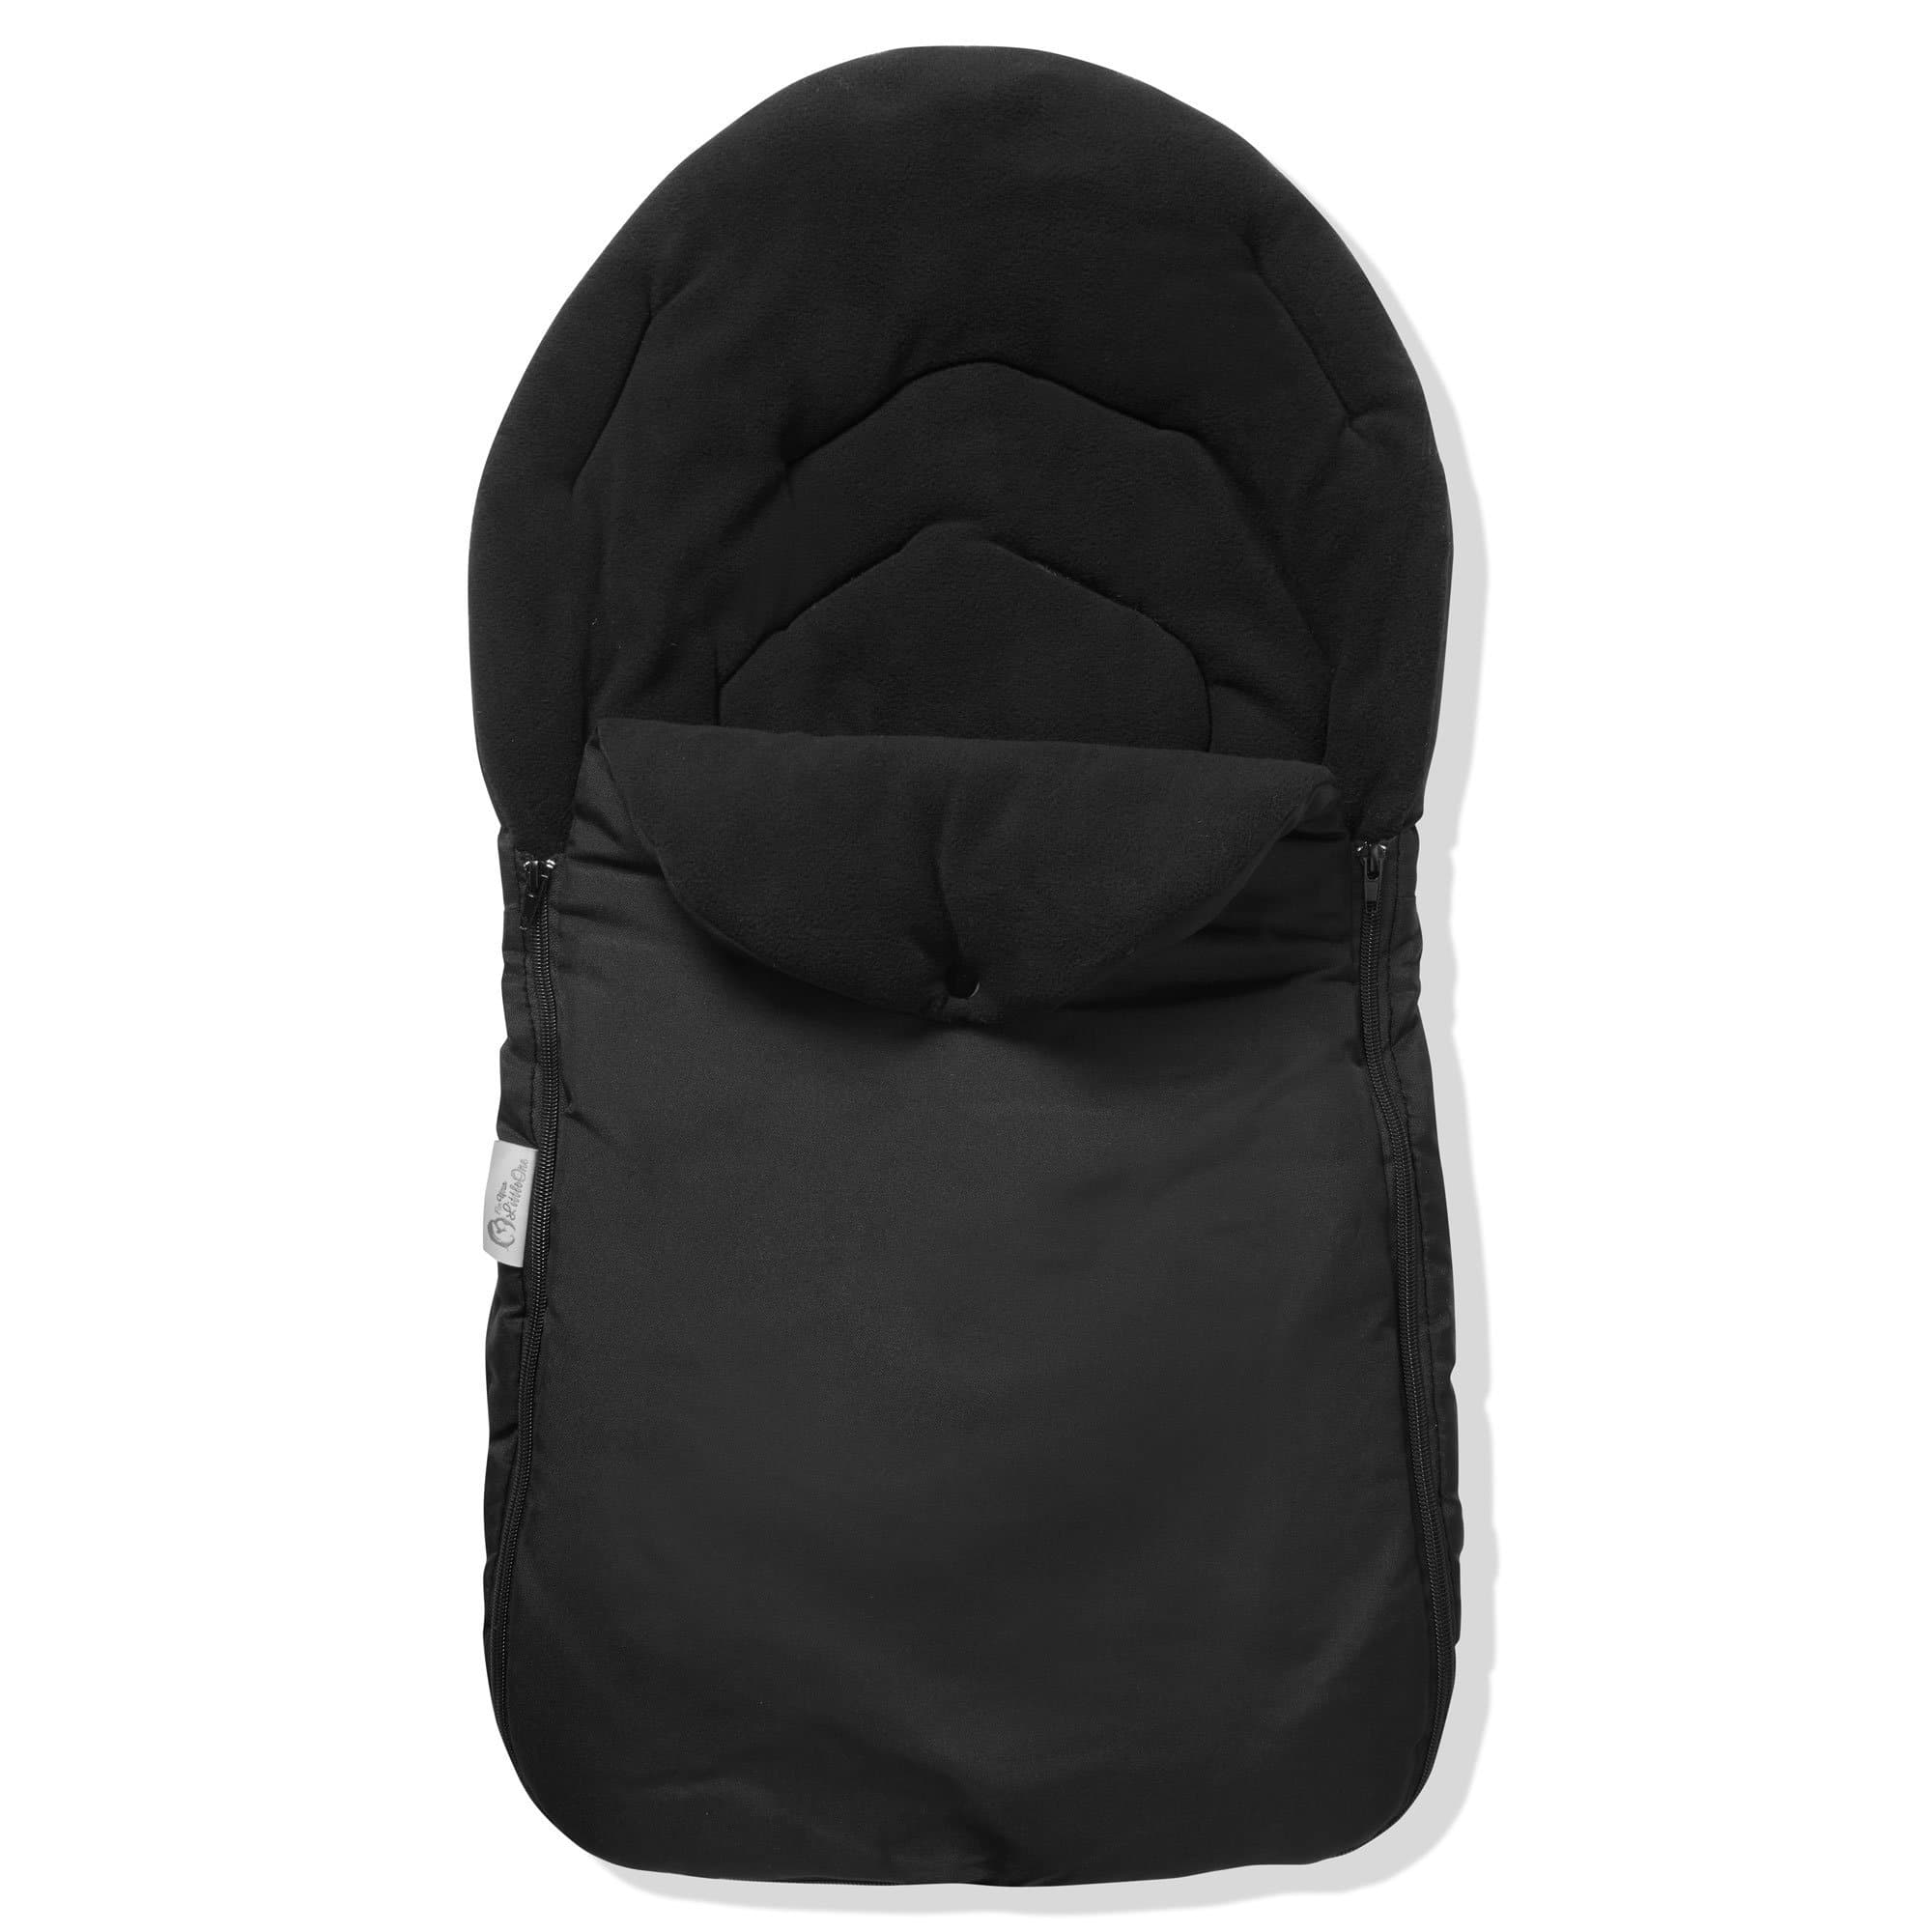 Car Seat Footmuff / Cosy Toes Compatible with ABC Design - Black / Fits All Models | For Your Little One